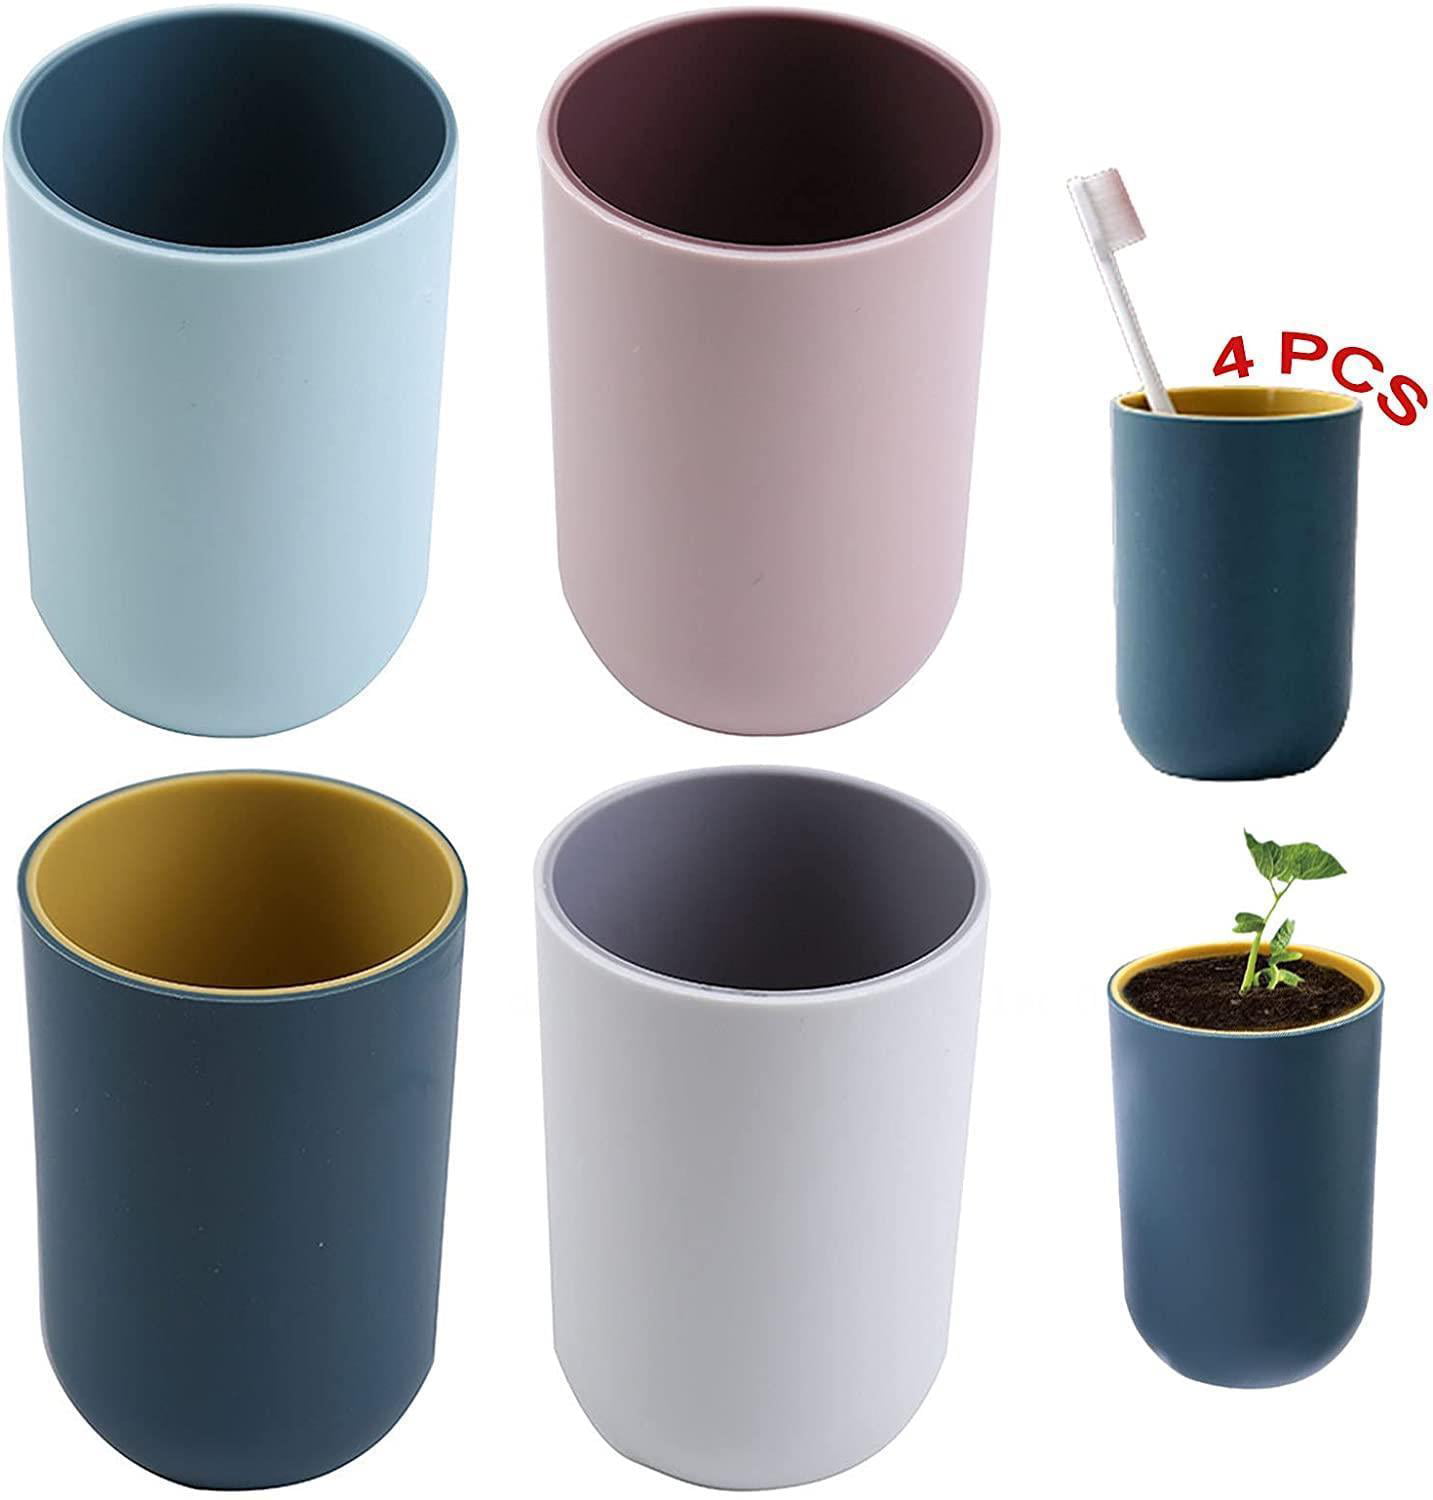 MARSMO 4 Pcs Tooth Cup, Plastic Cup, Toothbrush Holder, for Toothbrush and  Toothpaste, 7.2?10.5cm Multi-color 4PCS - Walmart.com